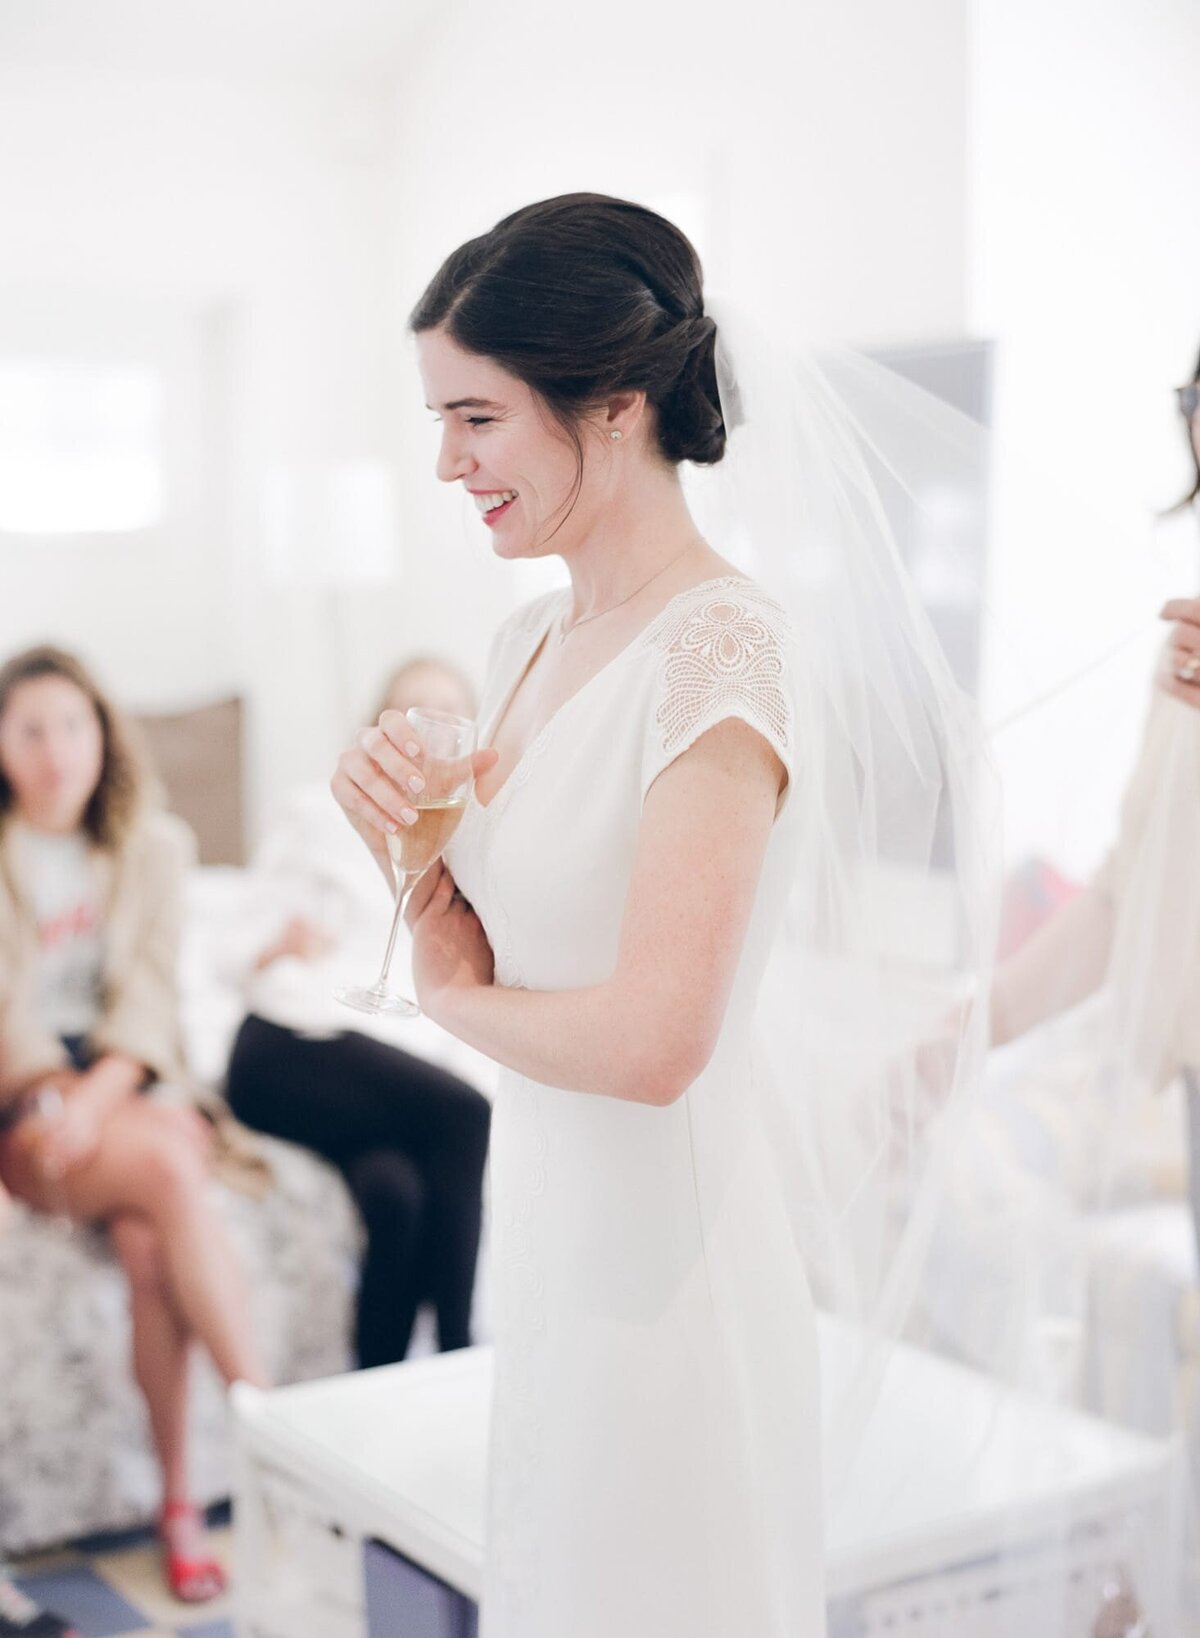 Bride holds a drink in her hand and smiles in anticipation as her maid adjusts her wedding veil.